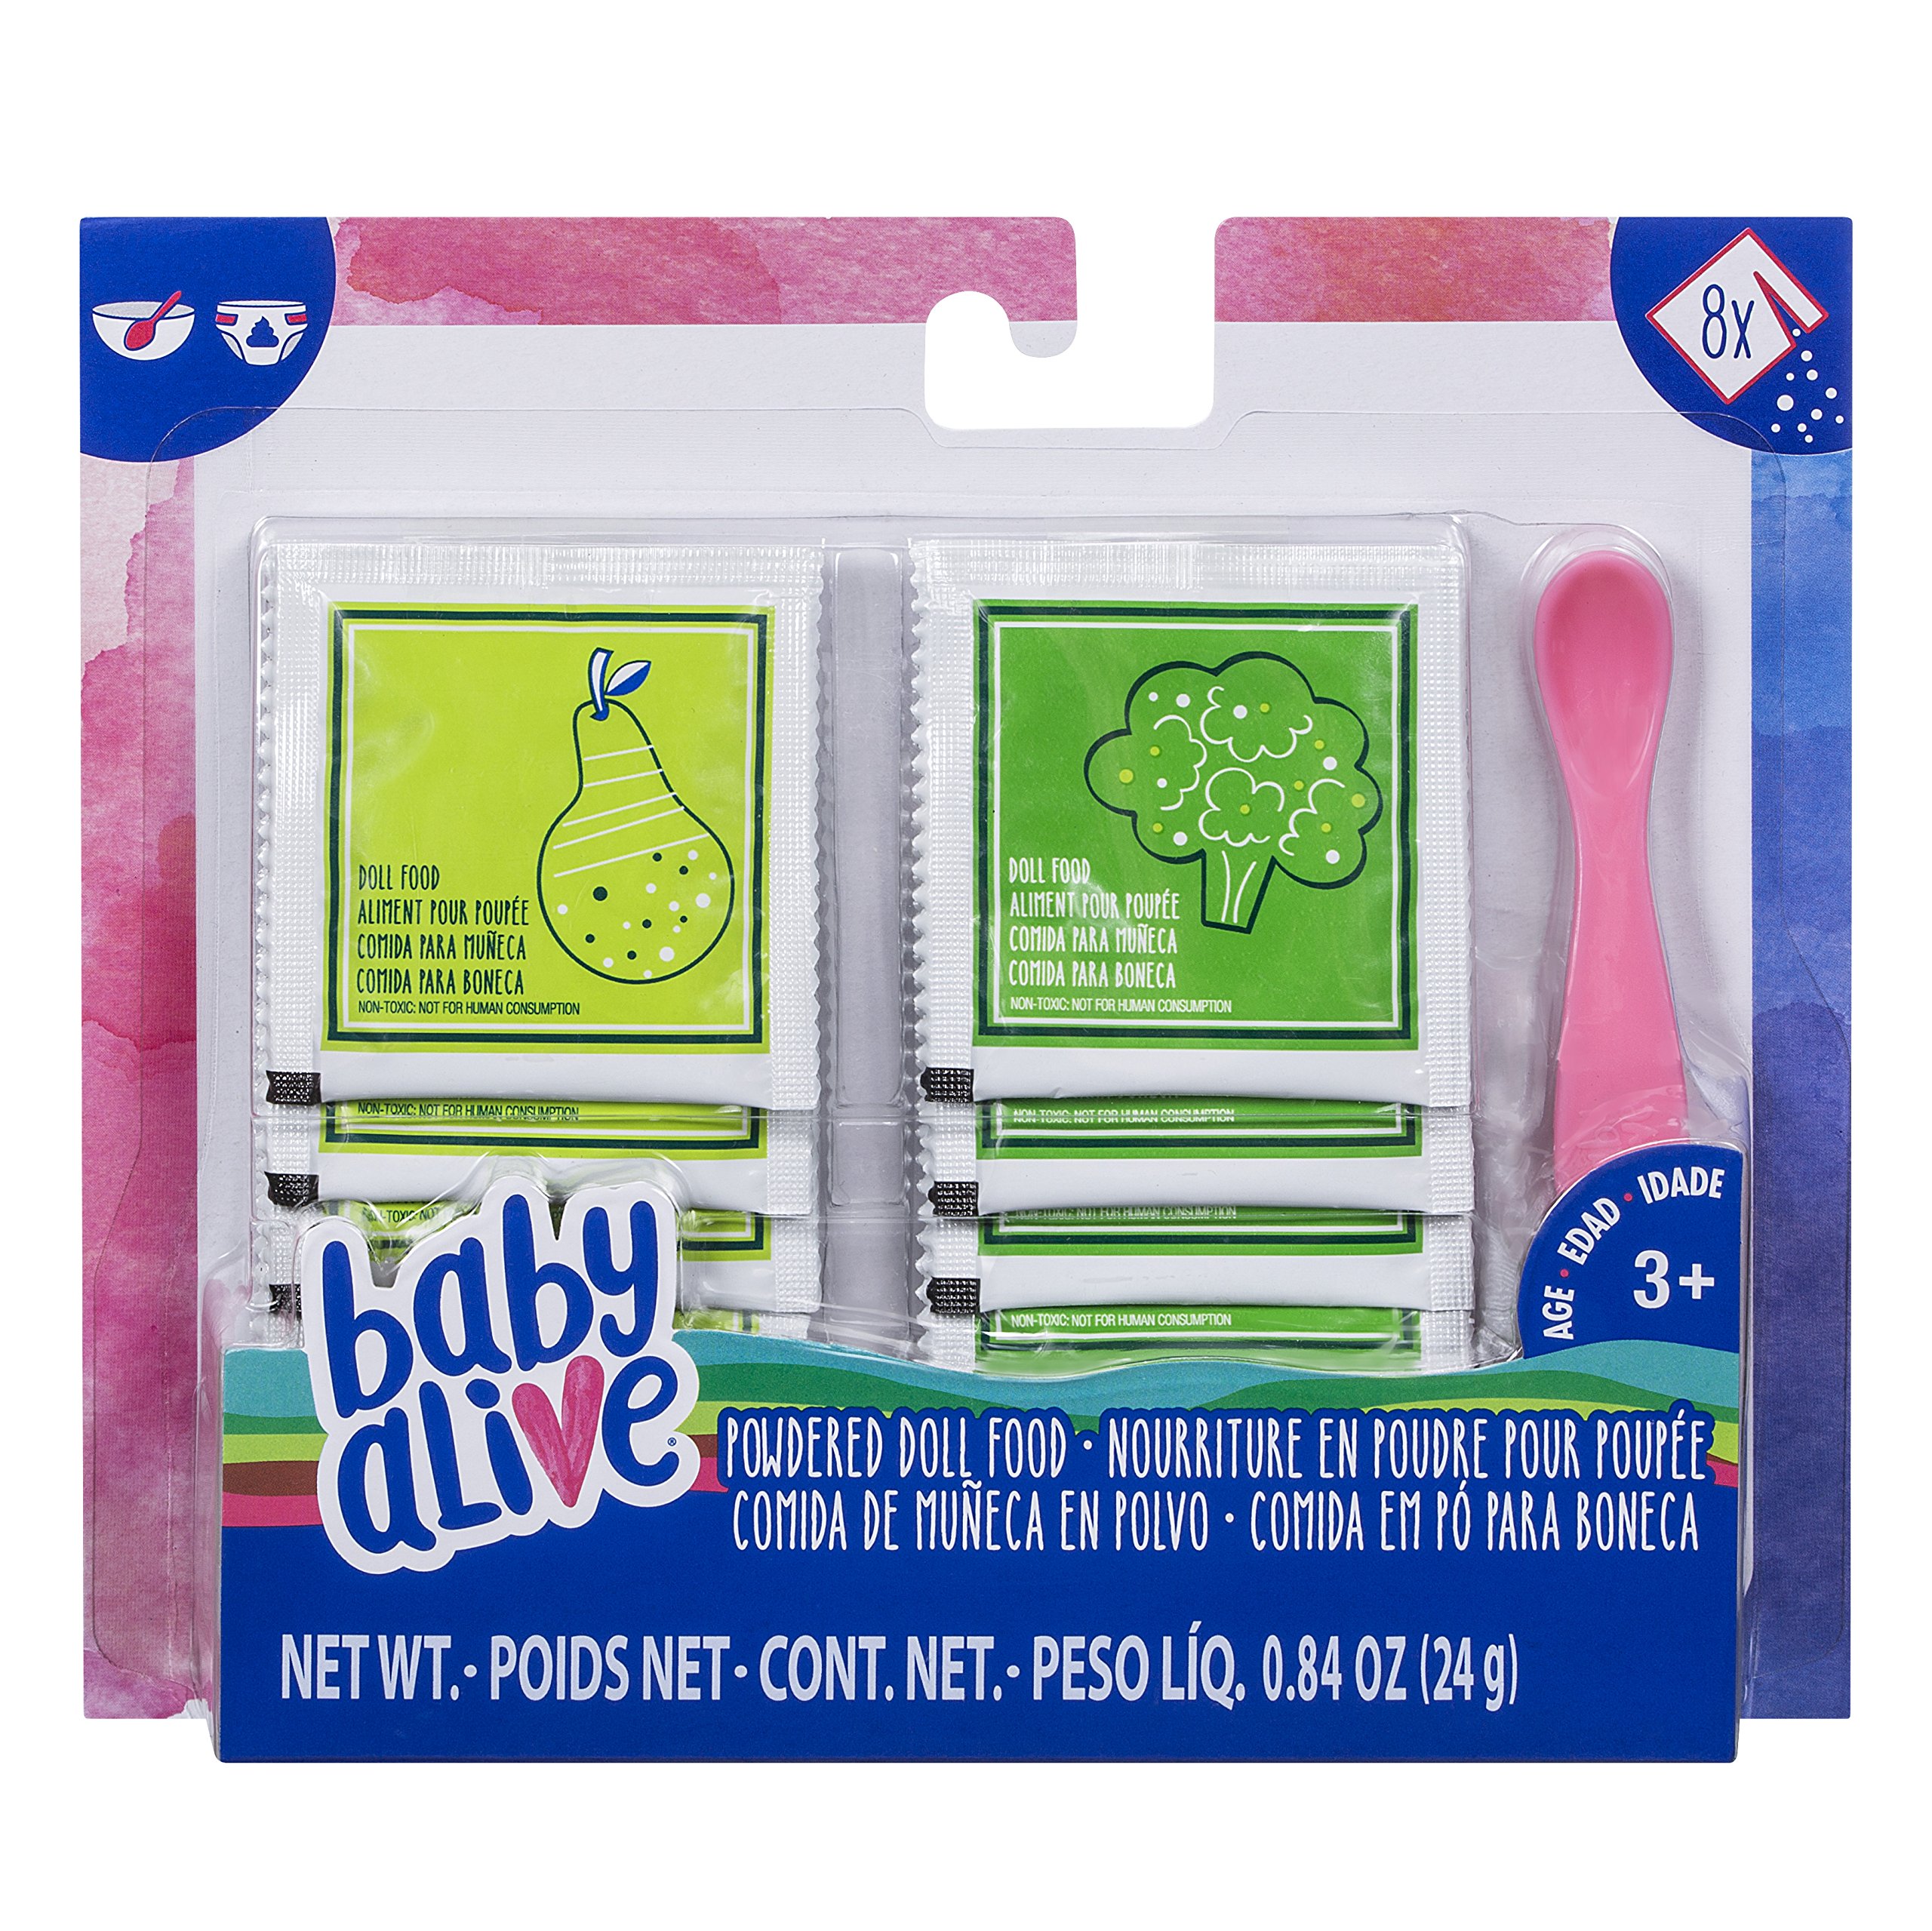 Baby Alive Powdered Doll Food - E0302